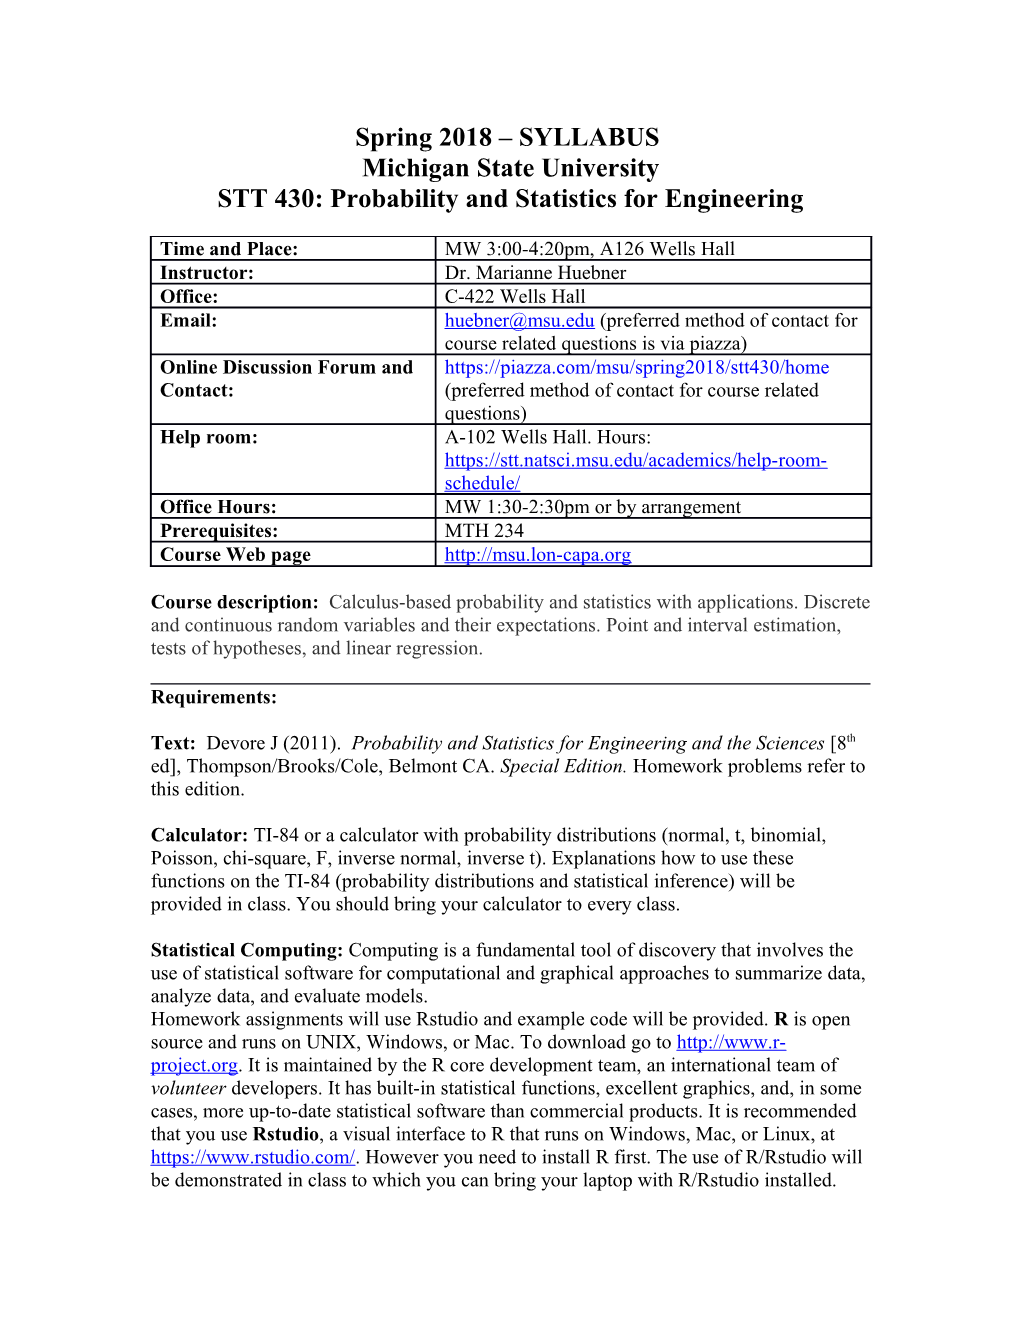 STT 430: Probability and Statistics for Engineering